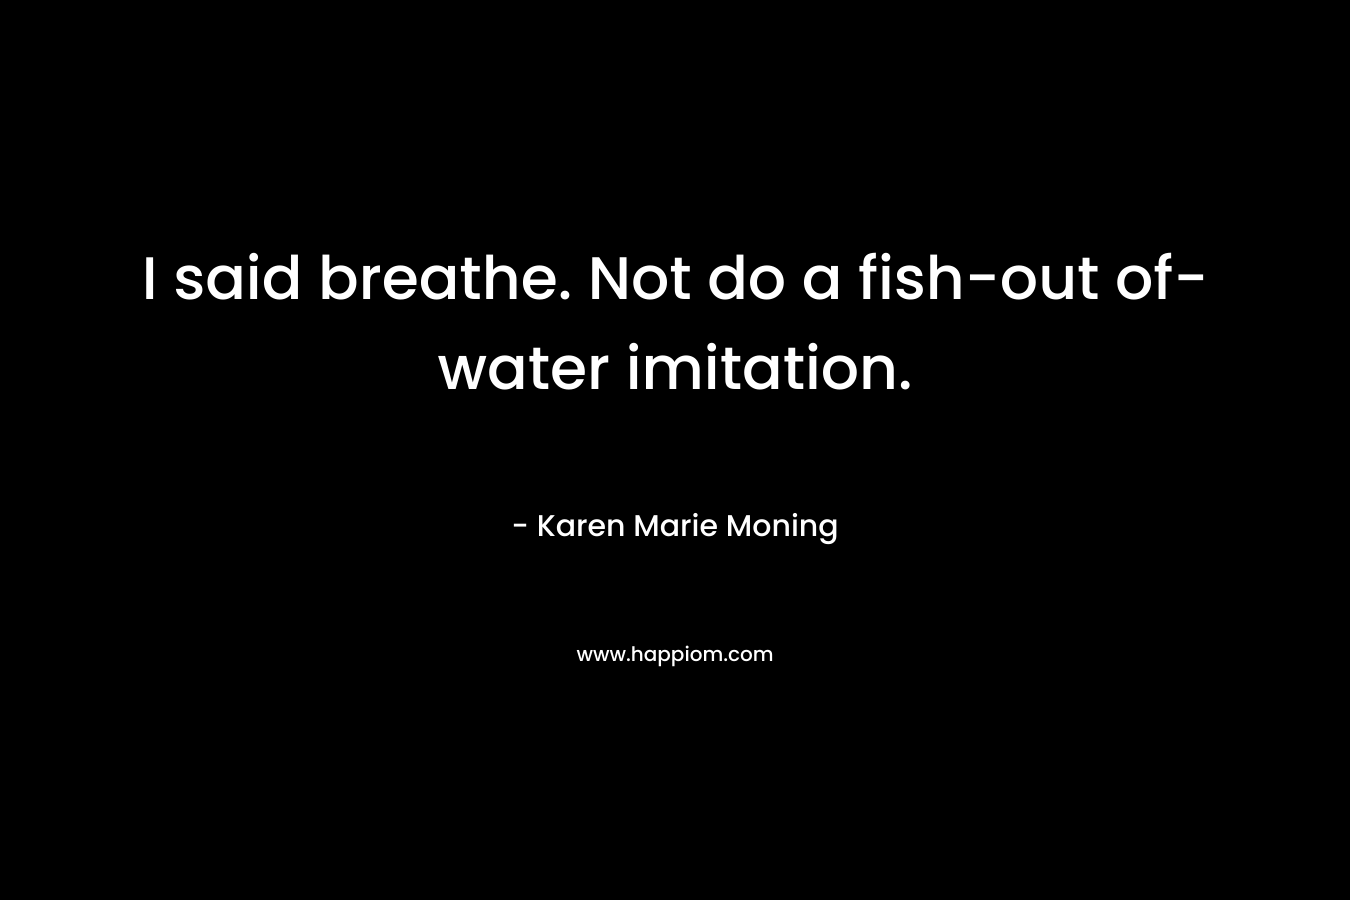 I said breathe. Not do a fish-out of-water imitation.